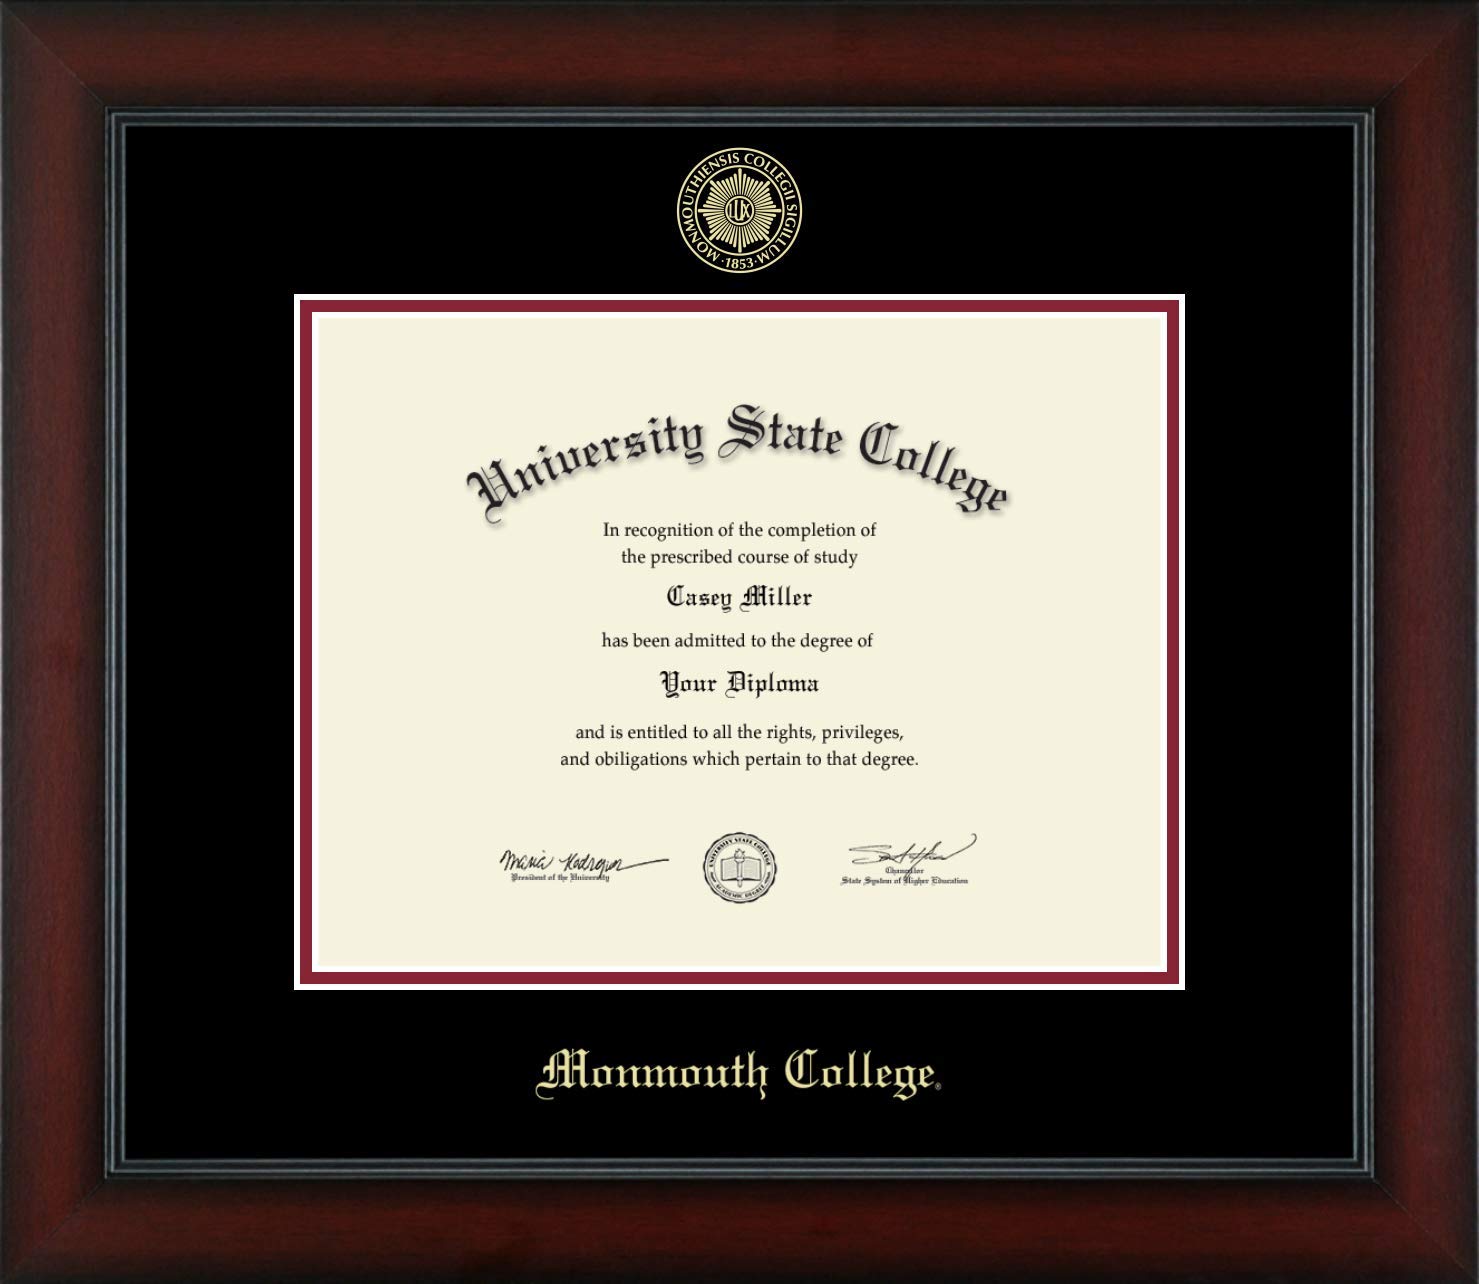 Monmouth College - Officially Licensed - 2013 to Present Bachelor's - Gold Embossed Diploma Frame - Document Size 11" x 8.5"